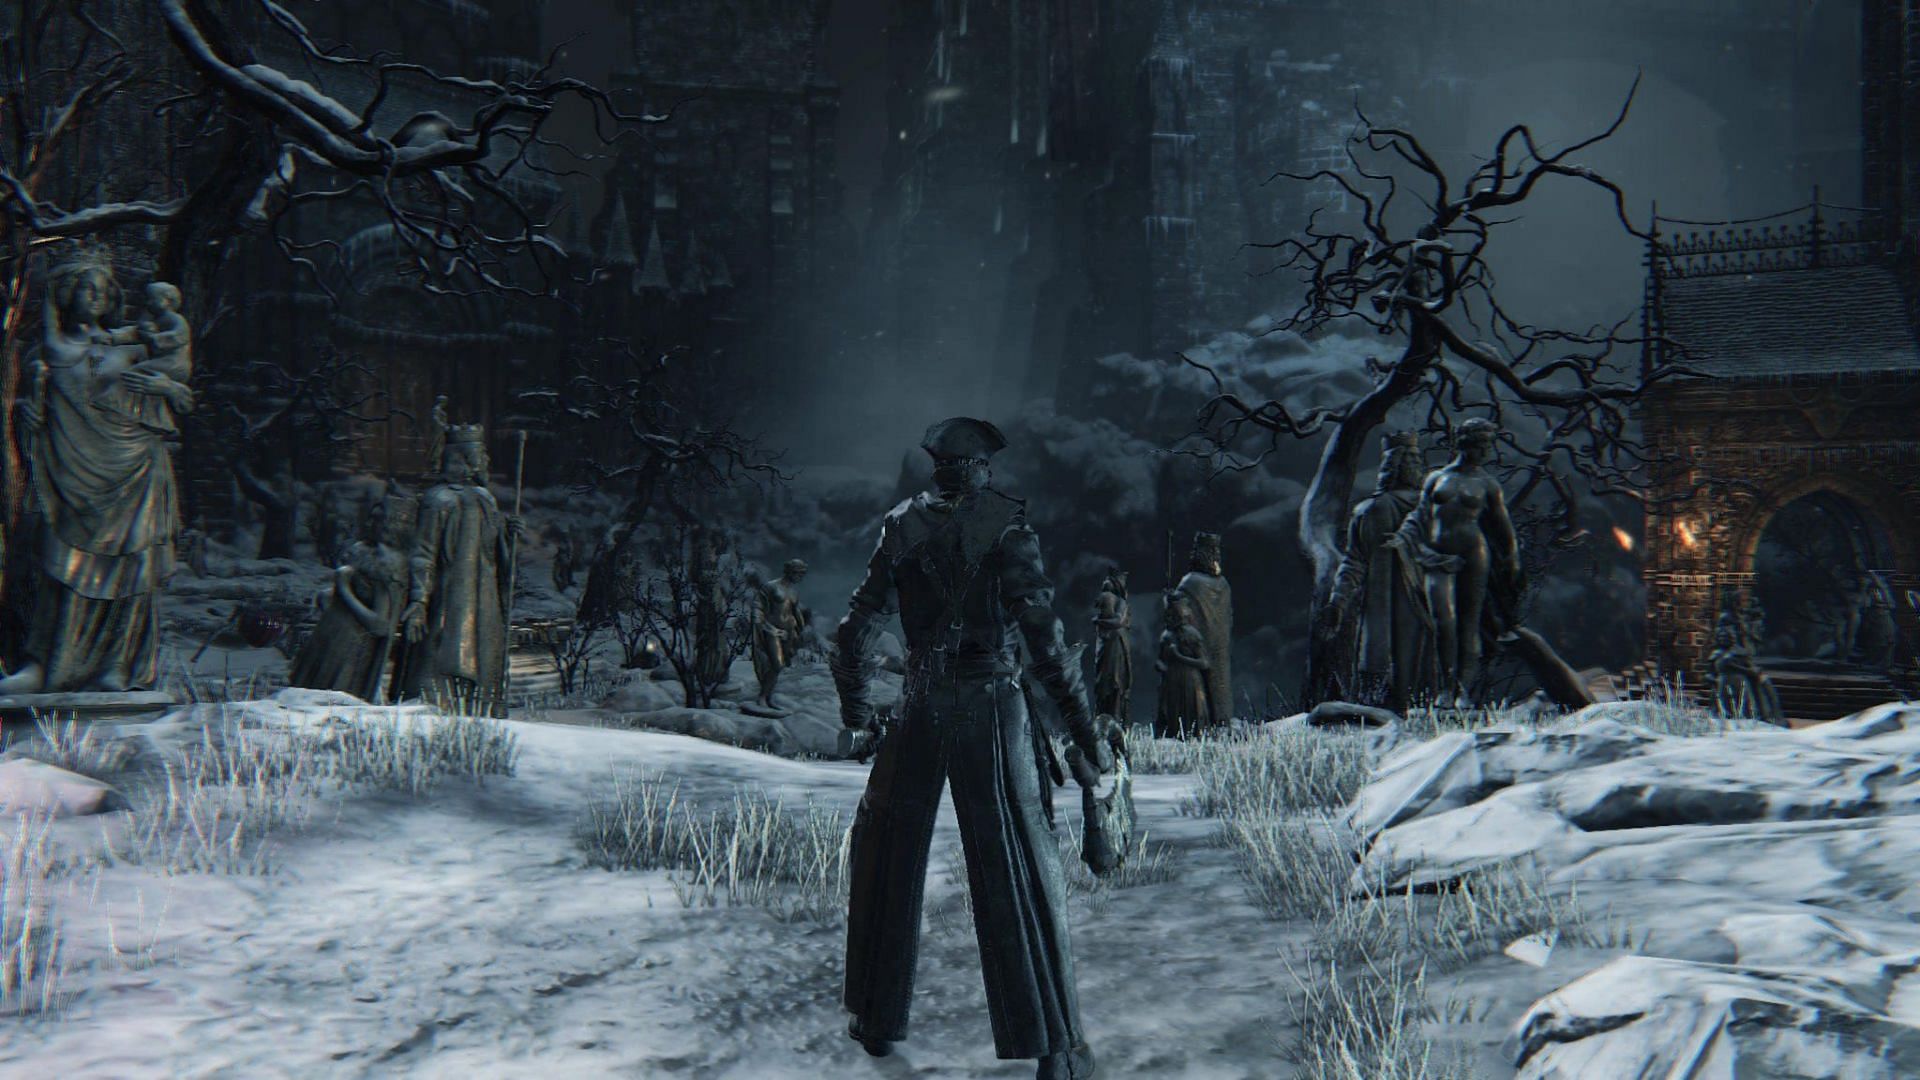 Here are five games like Bloodborne that you can play on PC